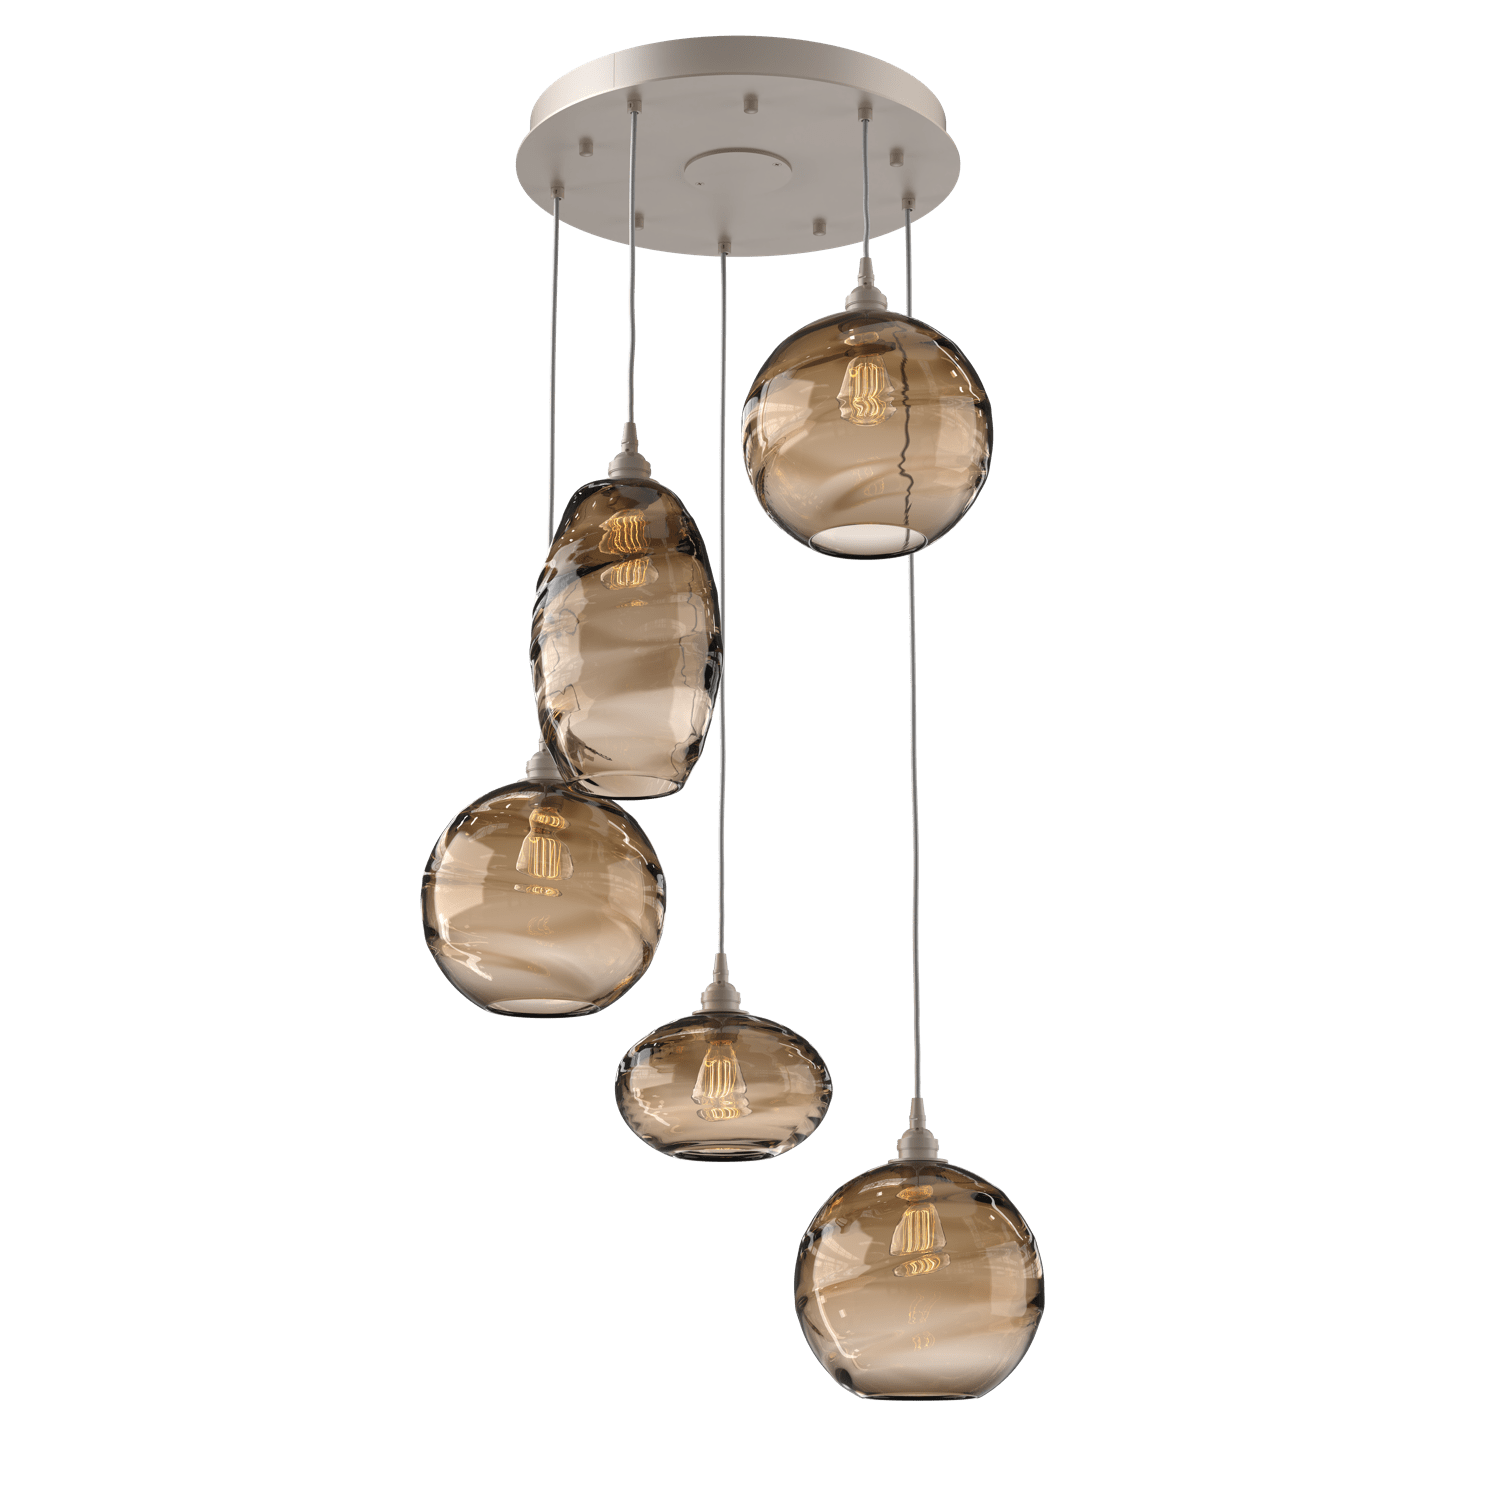 CHB0048-05-BS-OB-Hammerton-Studio-Optic-Blown-Glass-Misto-5-light-round-pendant-chandelier-with-metallic-beige-silver-finish-and-optic-bronze-blown-glass-shades-and-incandescent-lamping